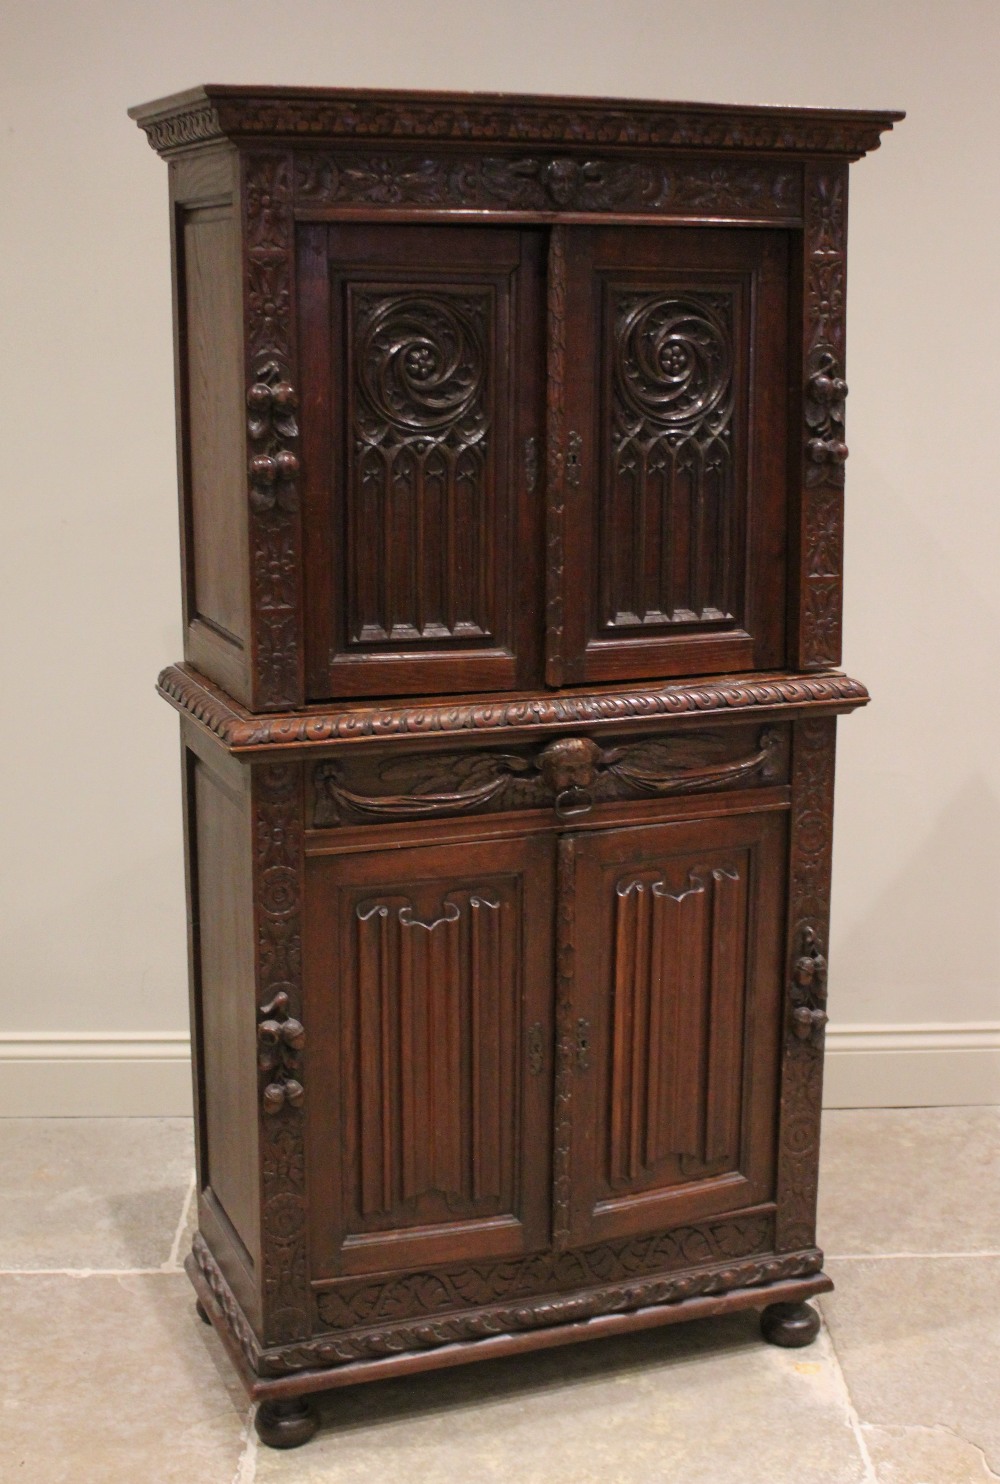 A Victorian carved oak collectors/specimen cabinet in the 17th century taste, the upper cabinet